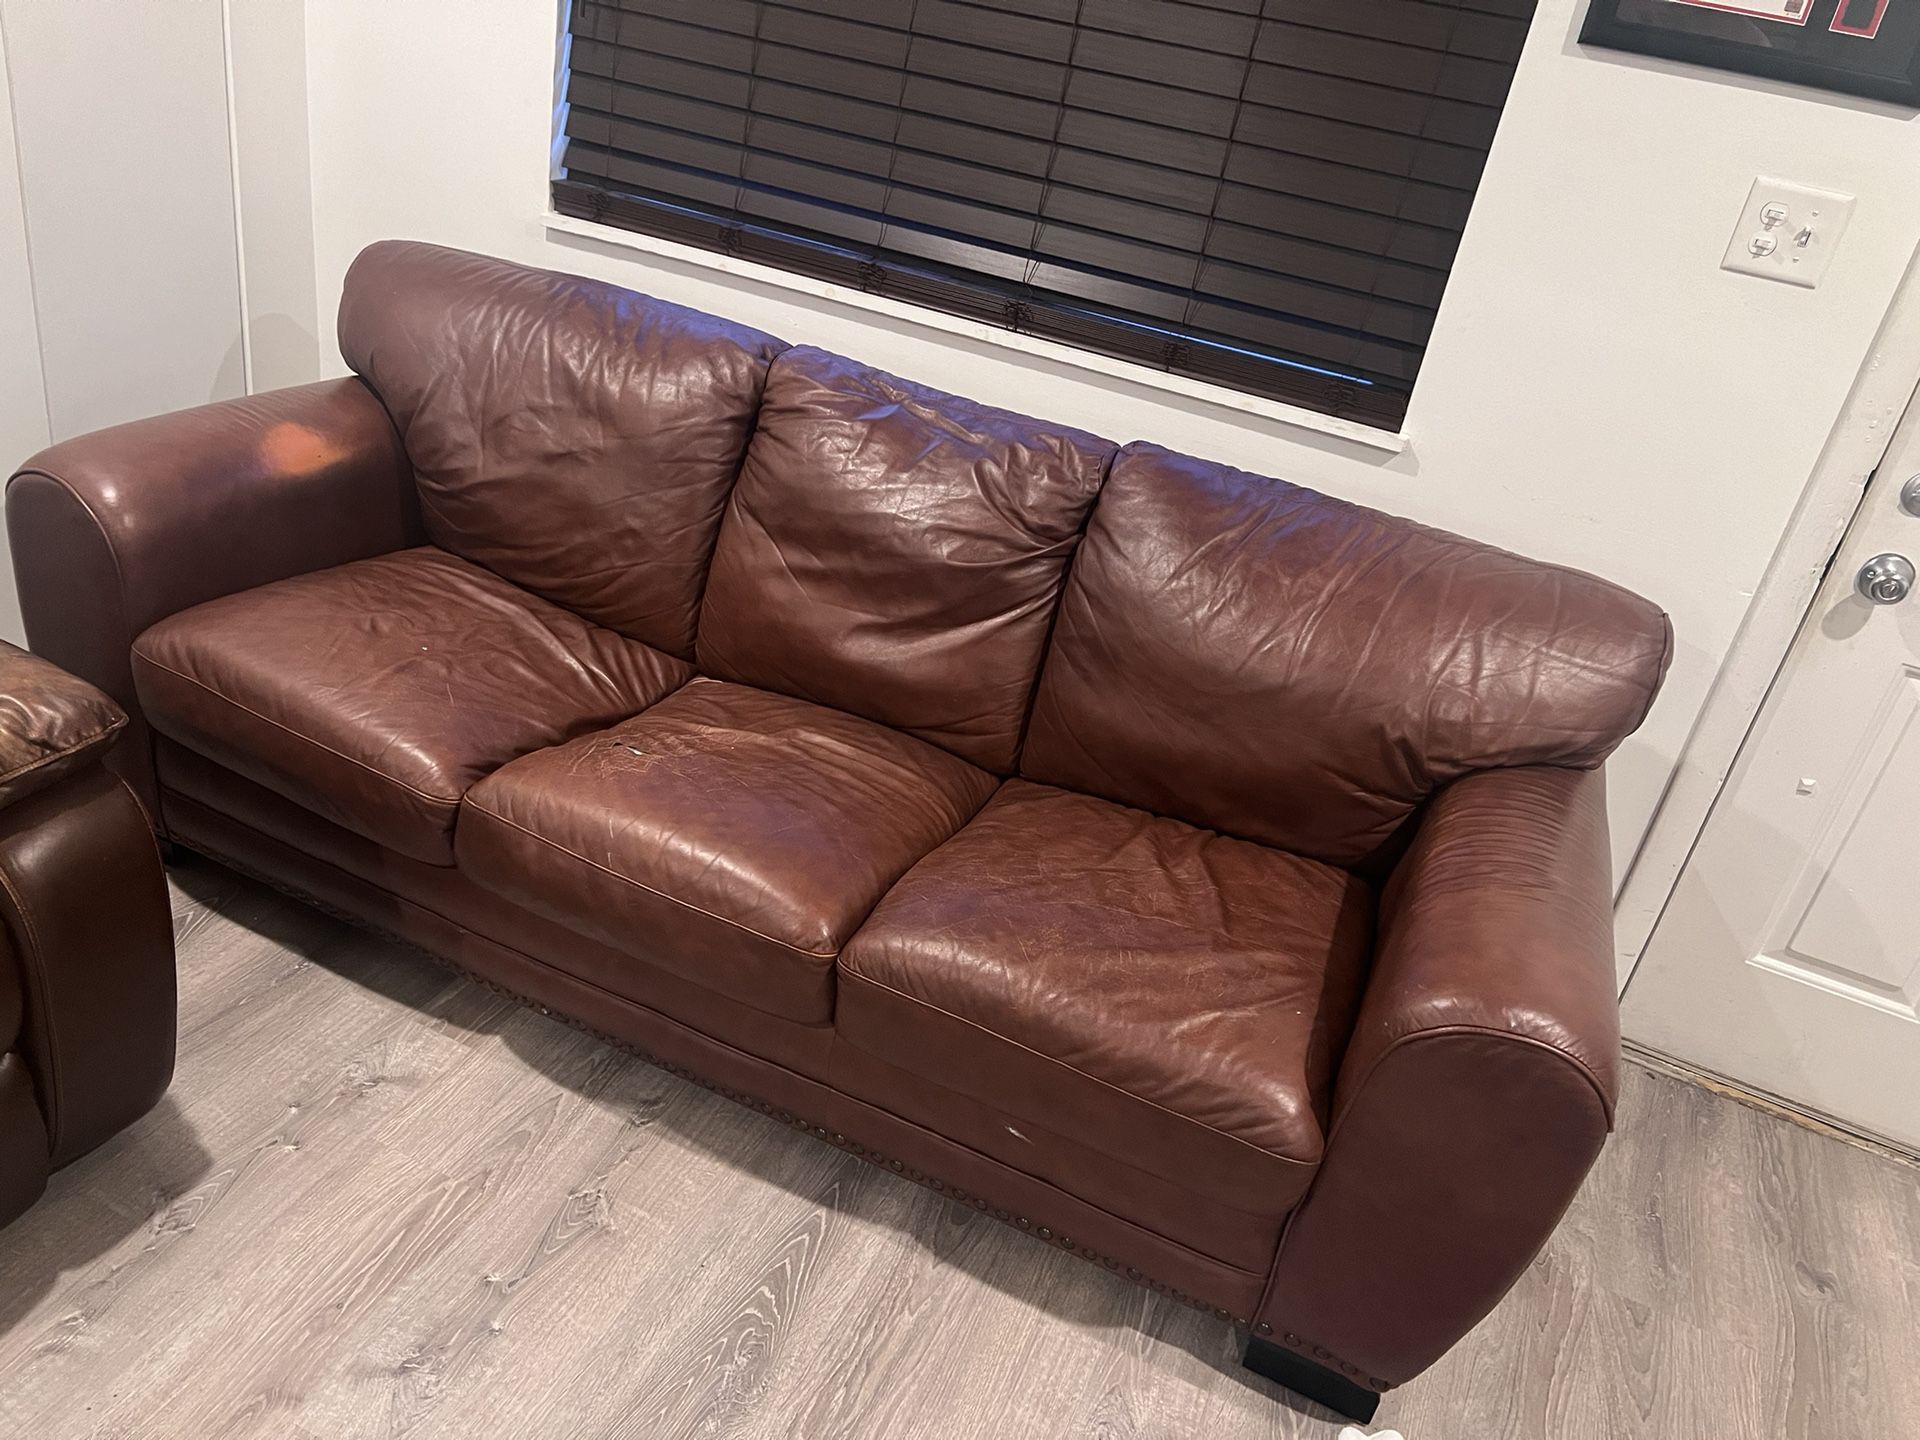 Ponderosa Living Room Set - Leather Couch